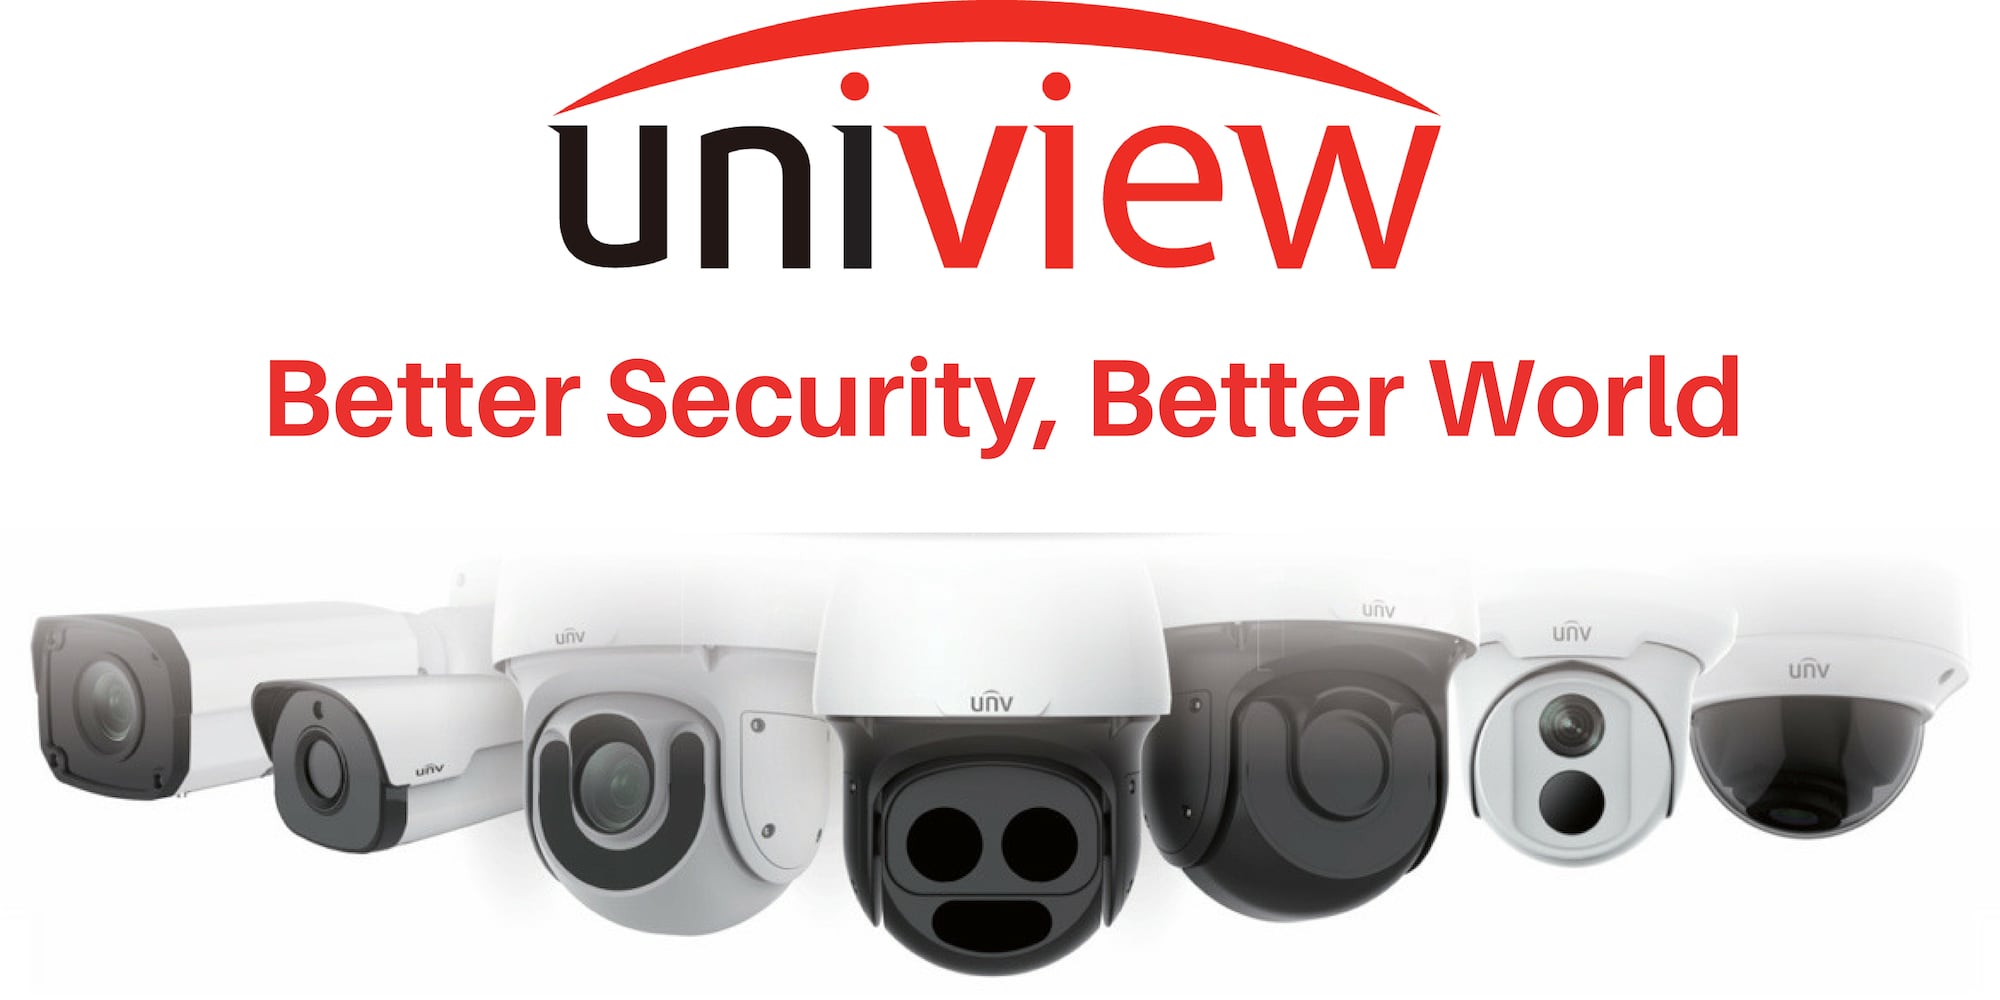 Uniview - The Perfect Business Partner 